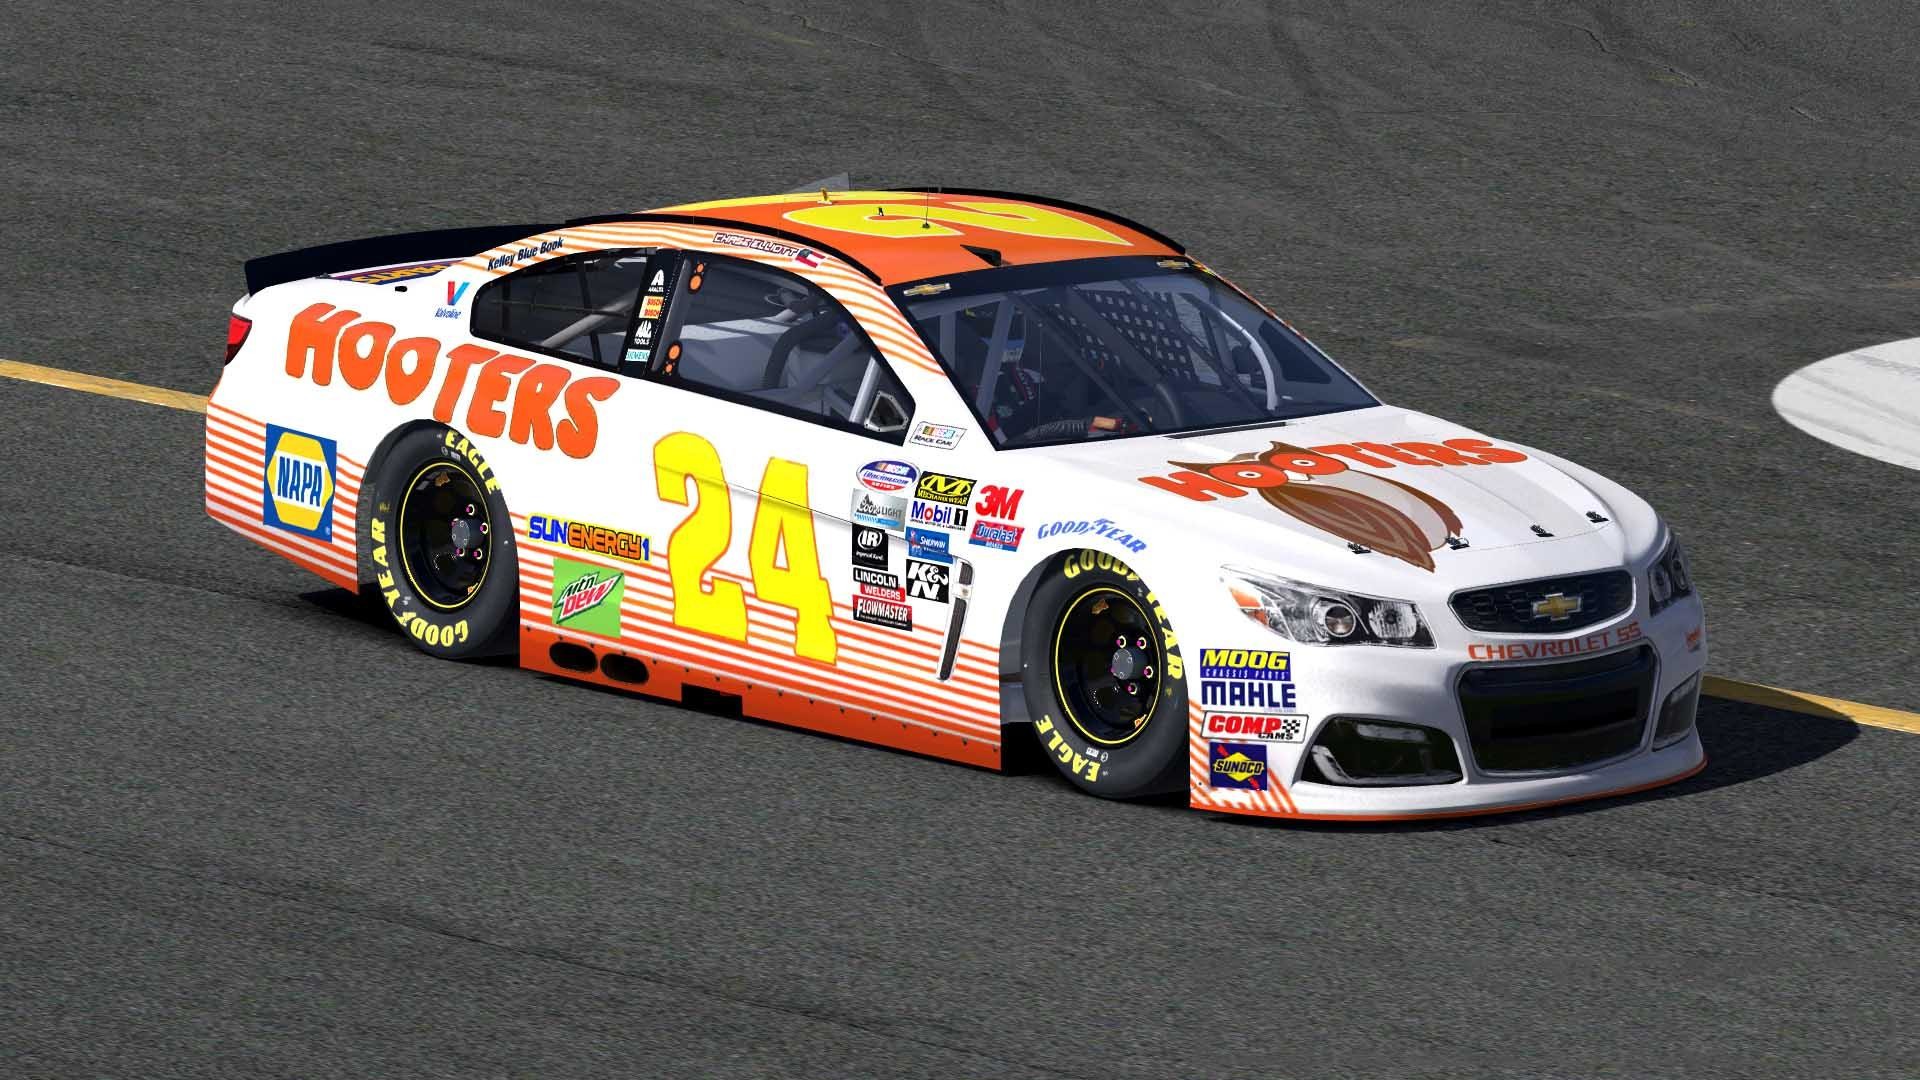 1920x1080 This paint scheme is unlisted. Only those with the link can see it.